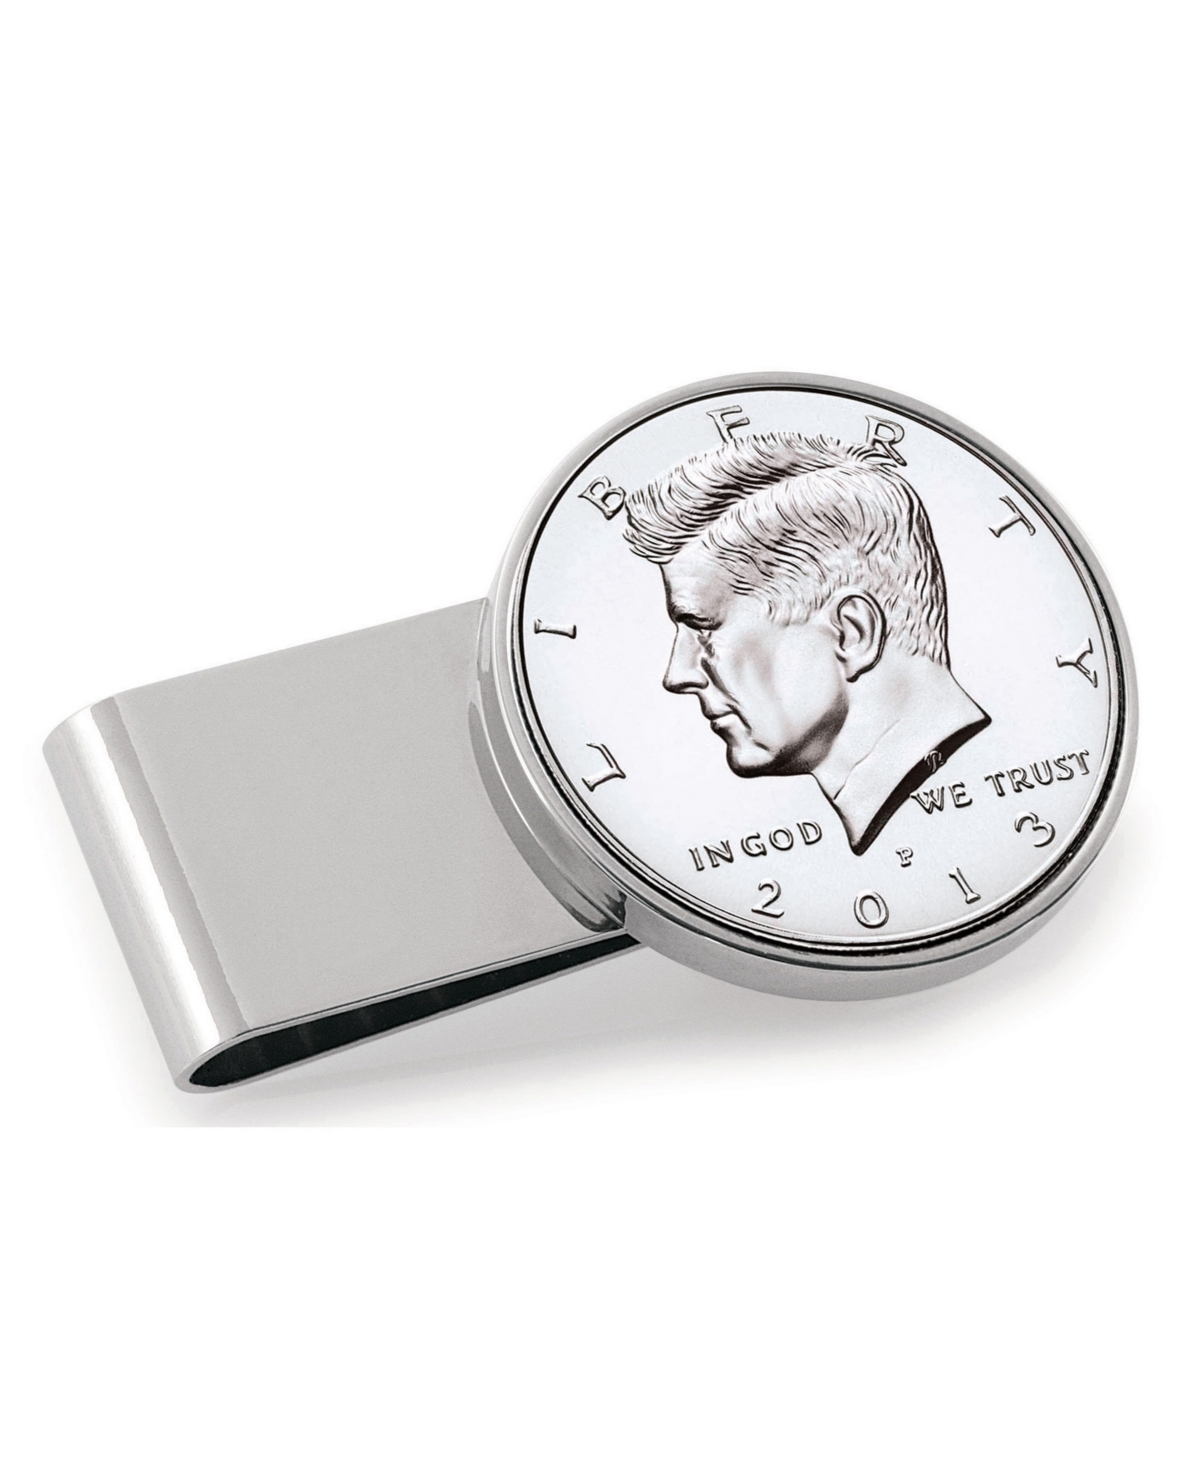 Men's American Coin Treasures Proof Jfk Half Dollar Stainless Steel Coin Money Clip - Silver